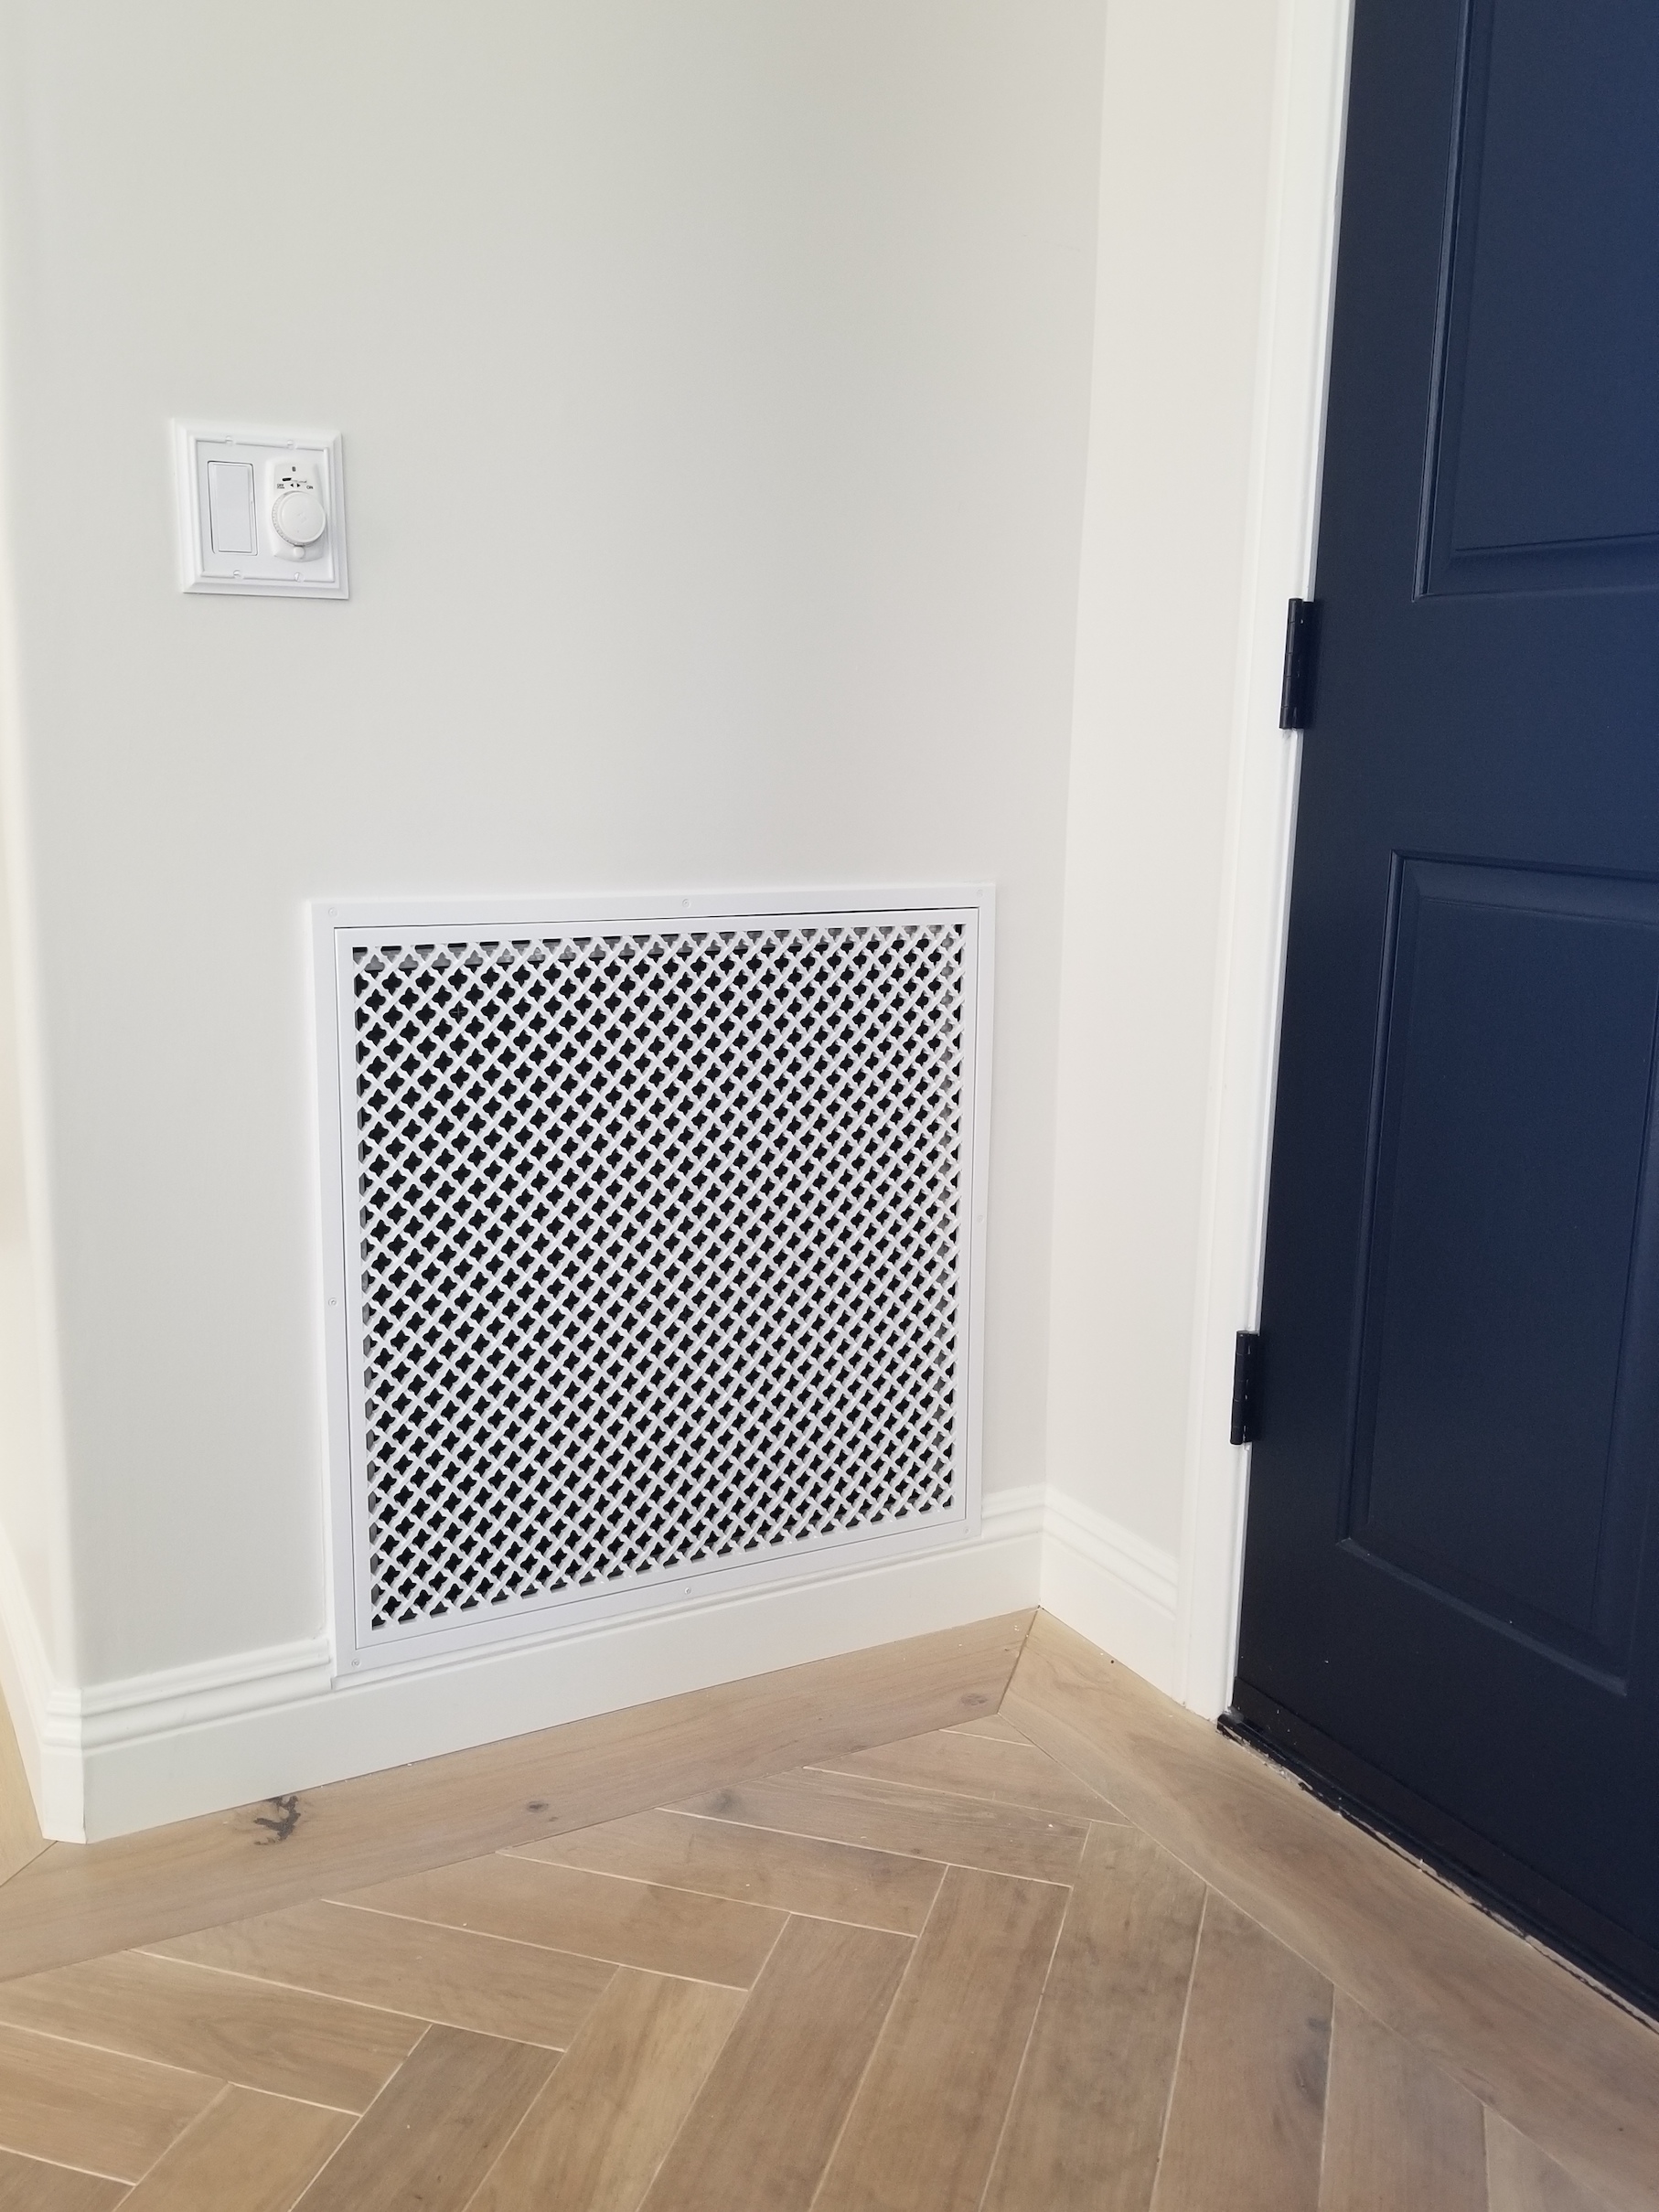 Basic Baseboard Heater Cover Panel - Vent Covers Unlimited